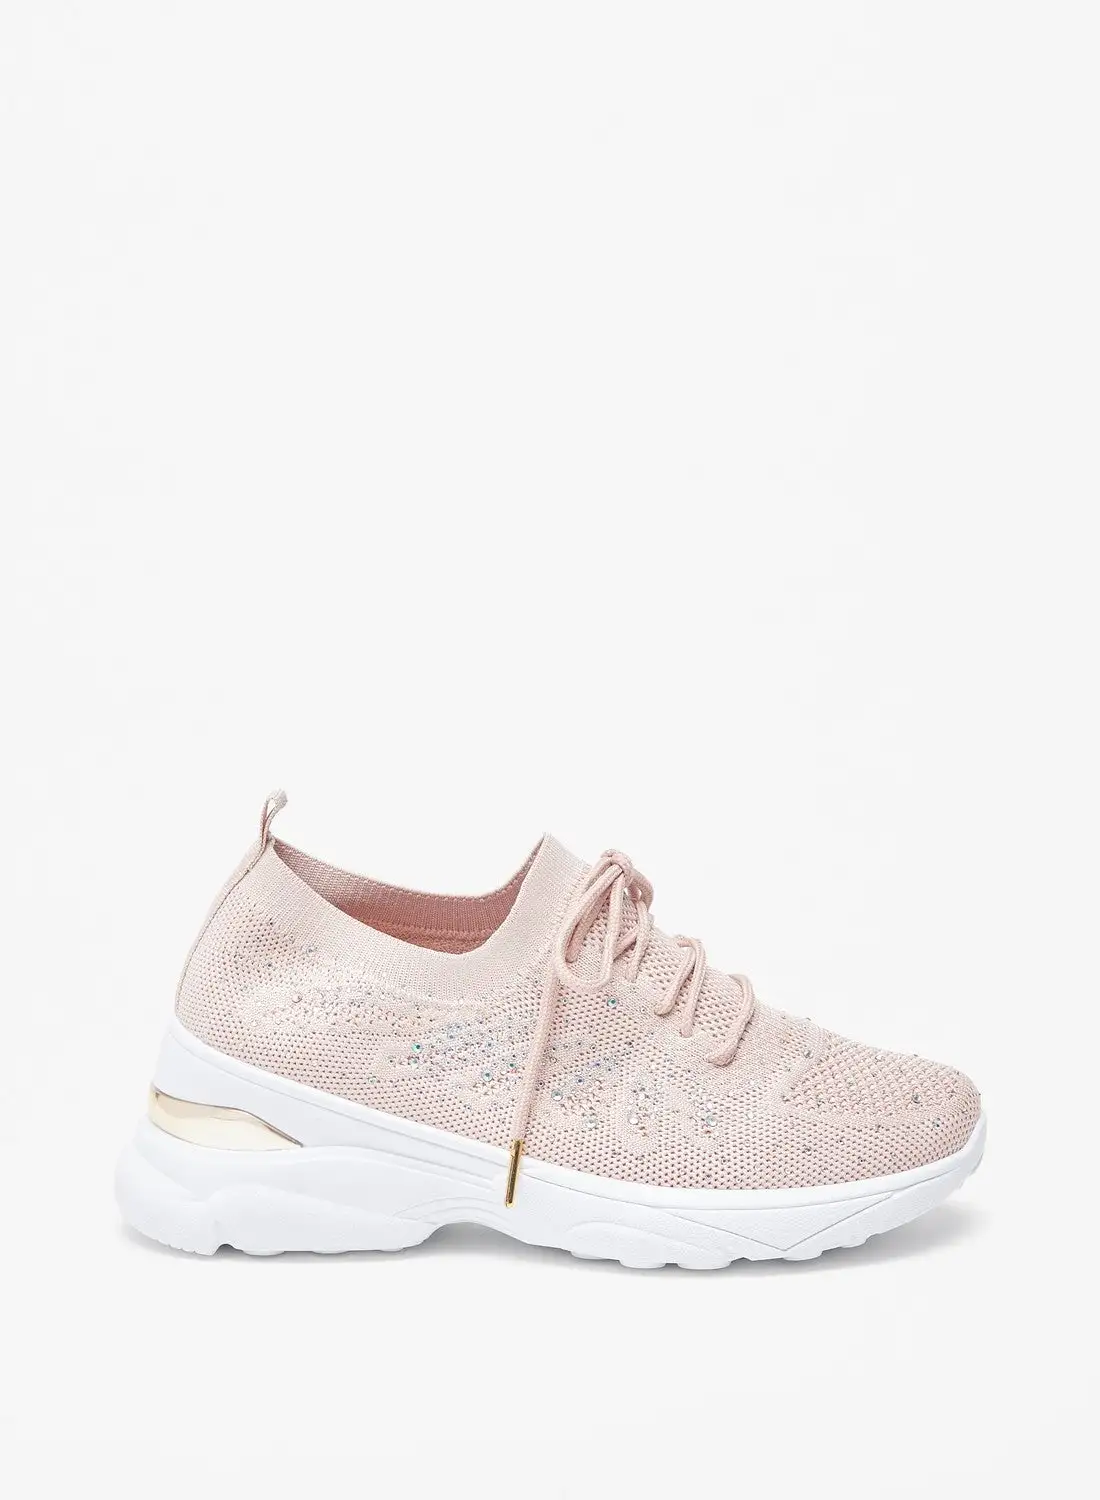 Flora Bella By Shoexpress Womens Embellished Sneakers with Lace-Up Closure